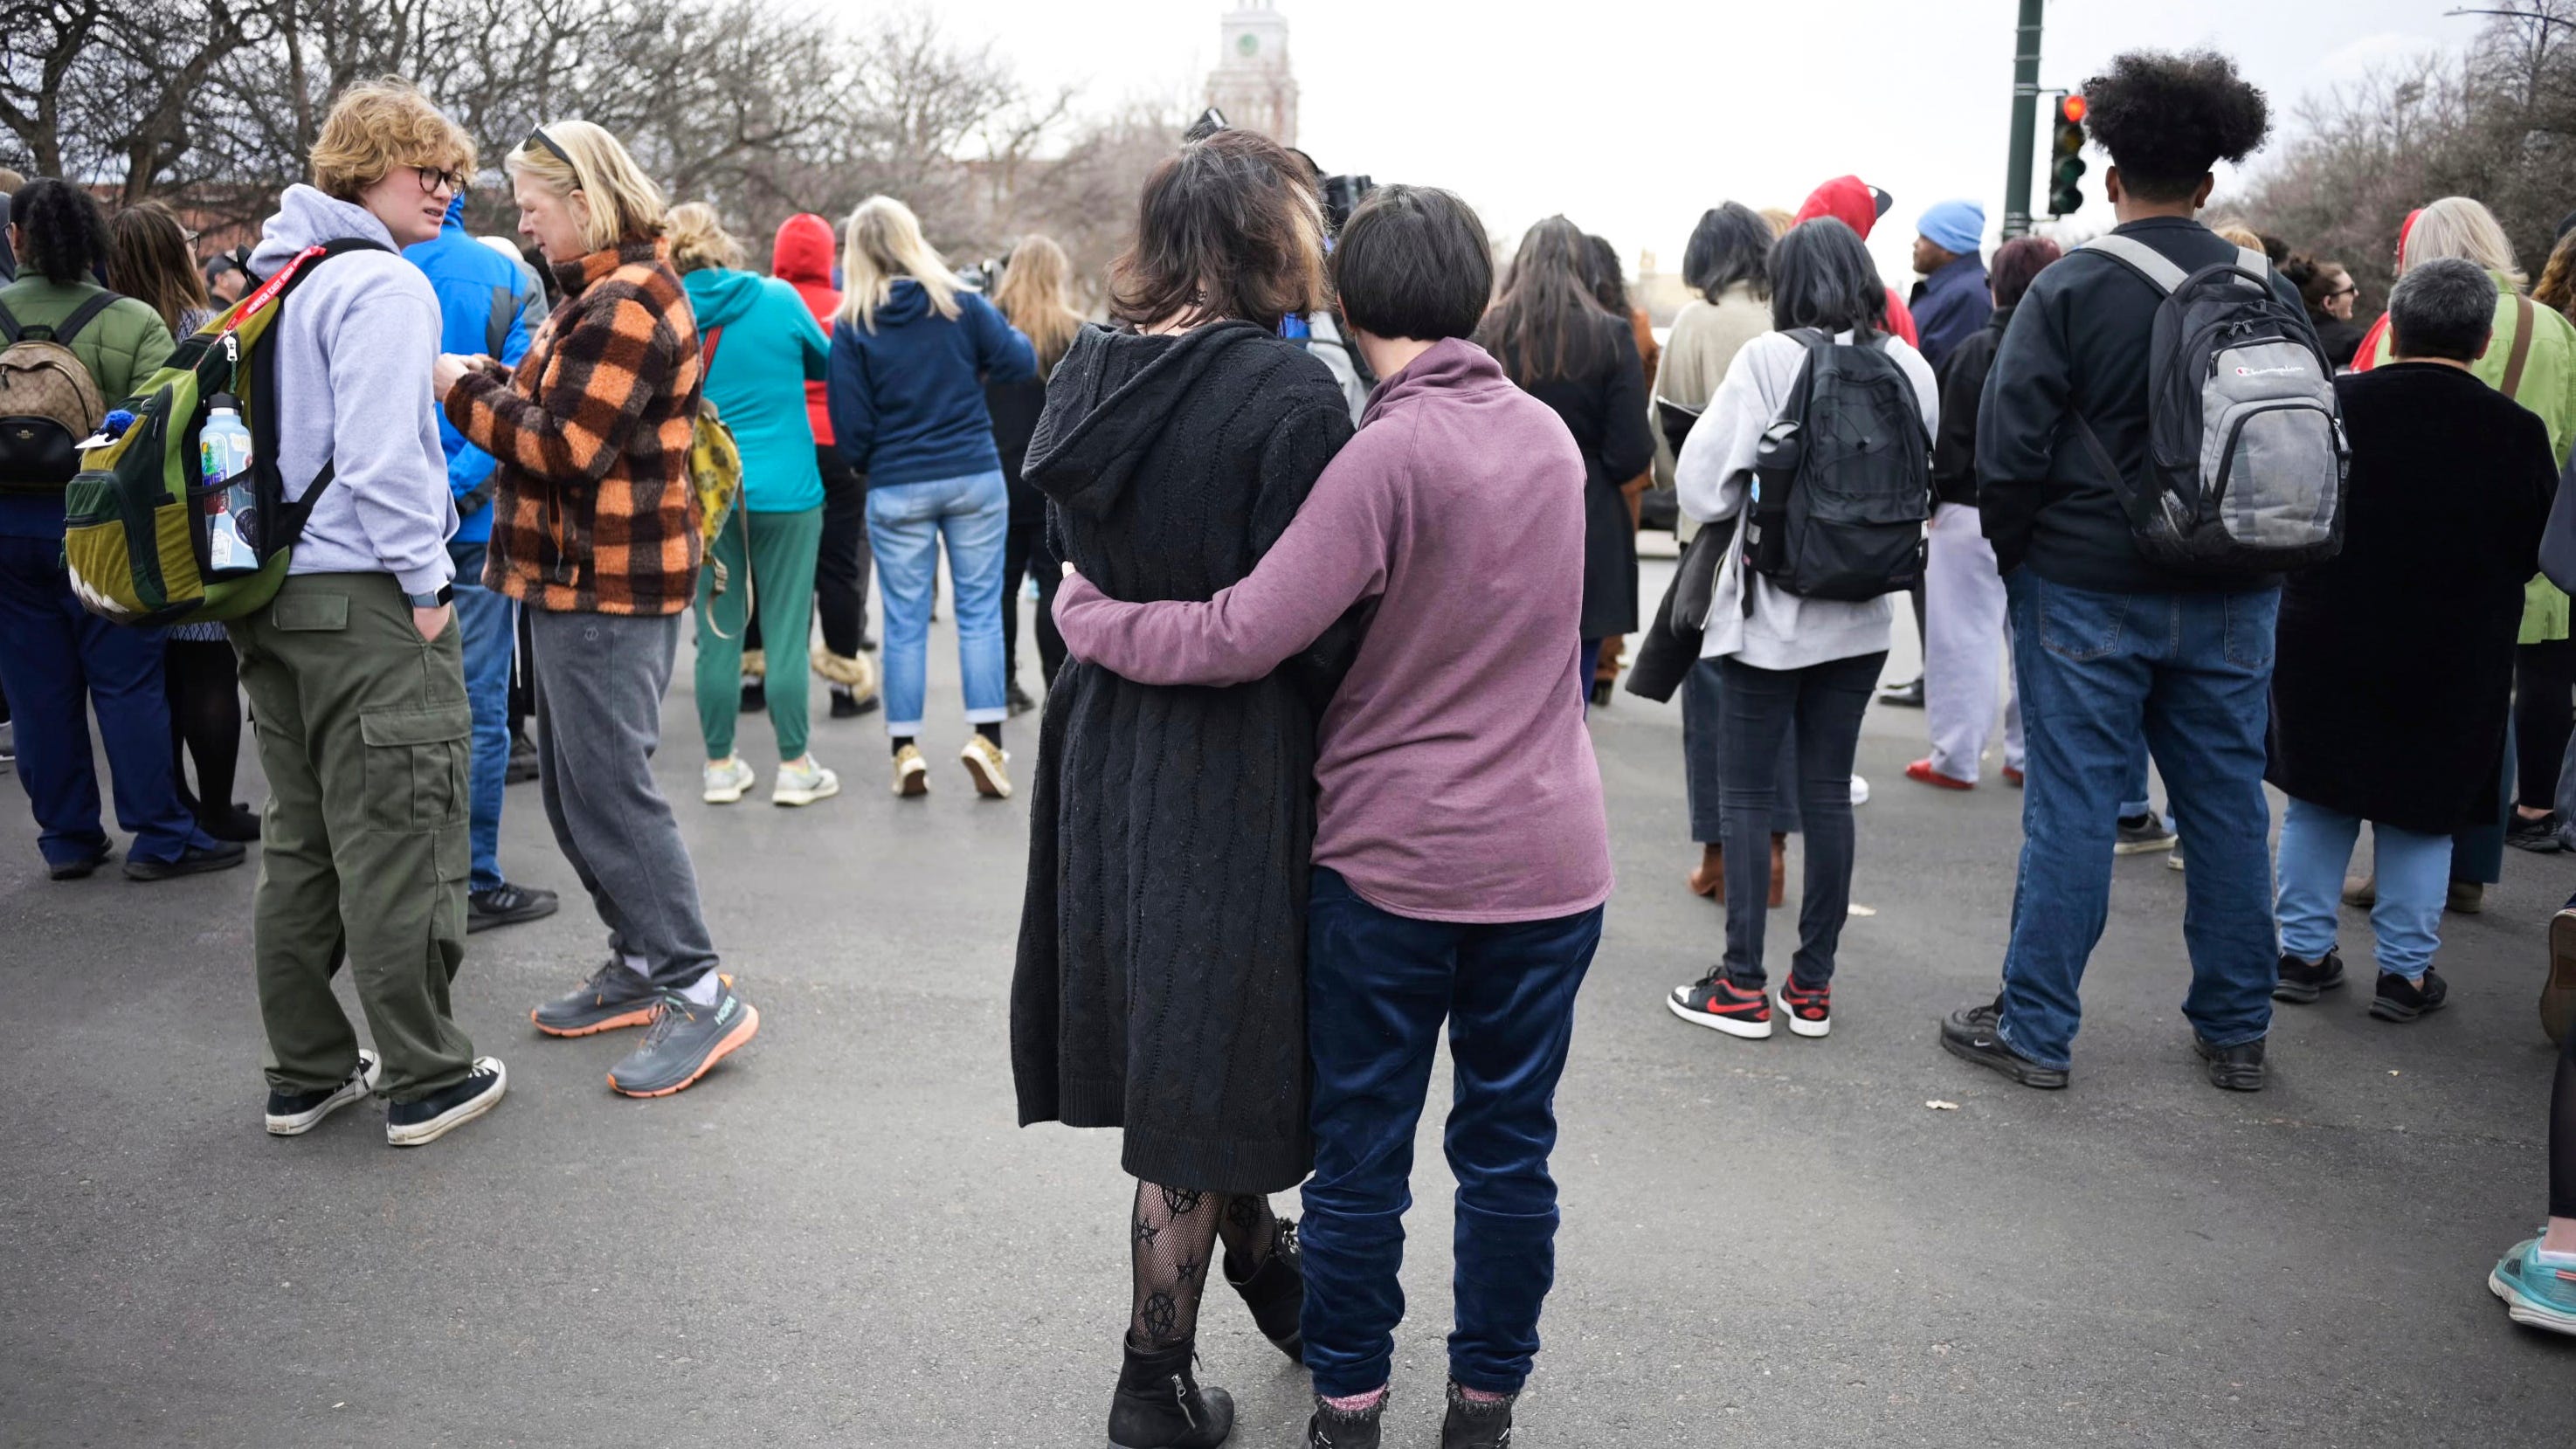 Isabella DeJoseph, 15, center left, is embraced by her mother Alana as they leave East High School after a school shooting, Wednesday, March 22, 2023, in Denver.